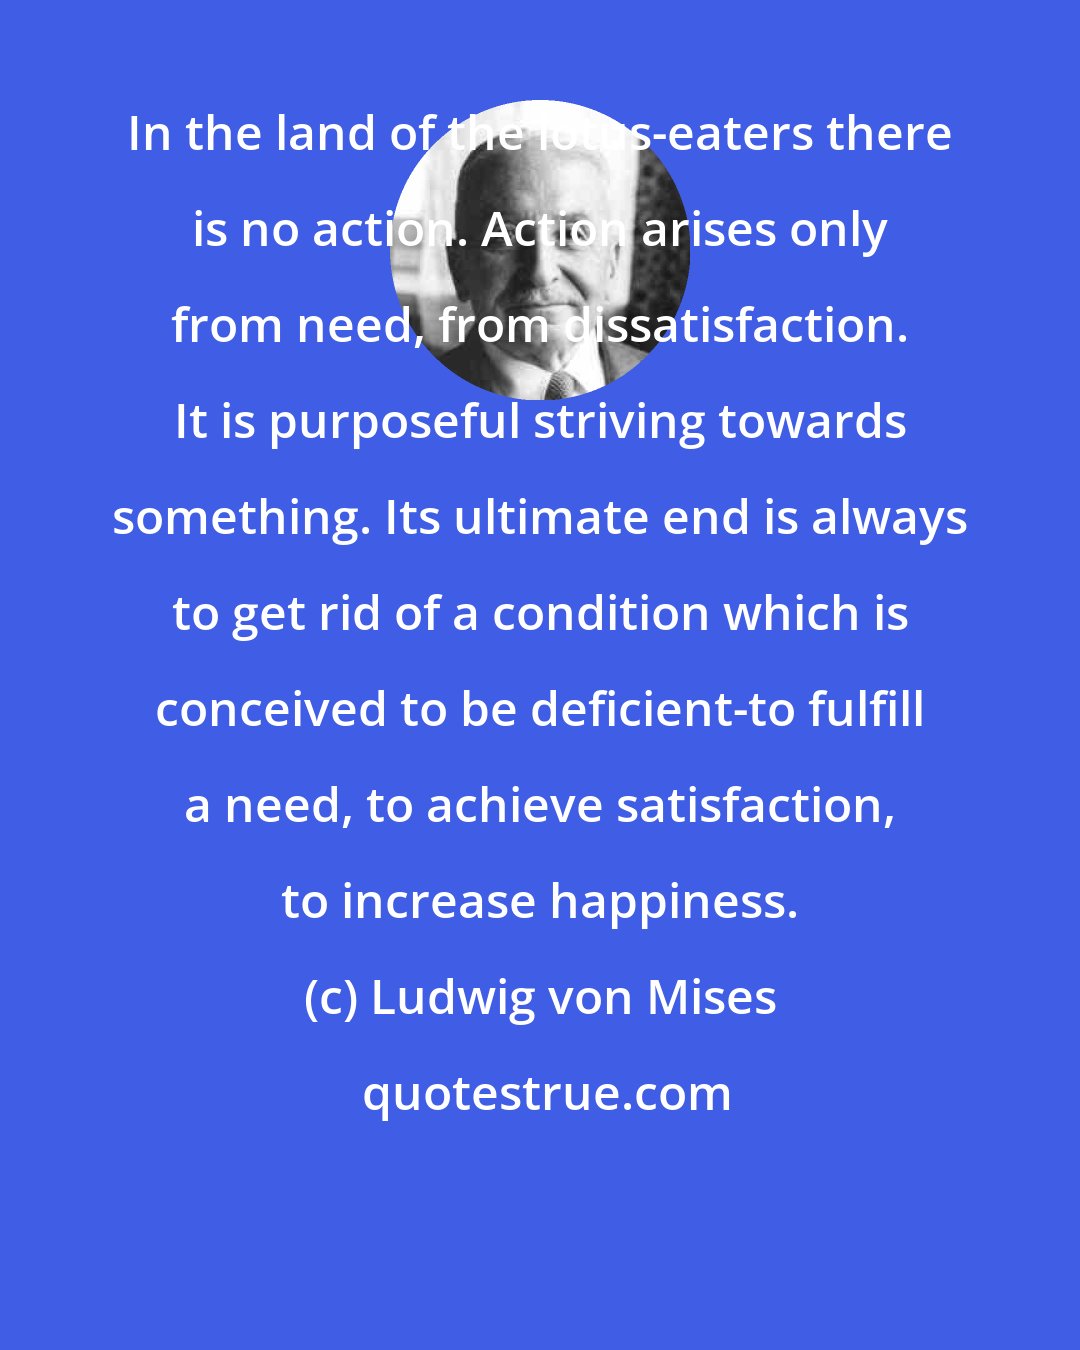 Ludwig von Mises: In the land of the lotus-eaters there is no action. Action arises only from need, from dissatisfaction. It is purposeful striving towards something. Its ultimate end is always to get rid of a condition which is conceived to be deficient-to fulfill a need, to achieve satisfaction, to increase happiness.